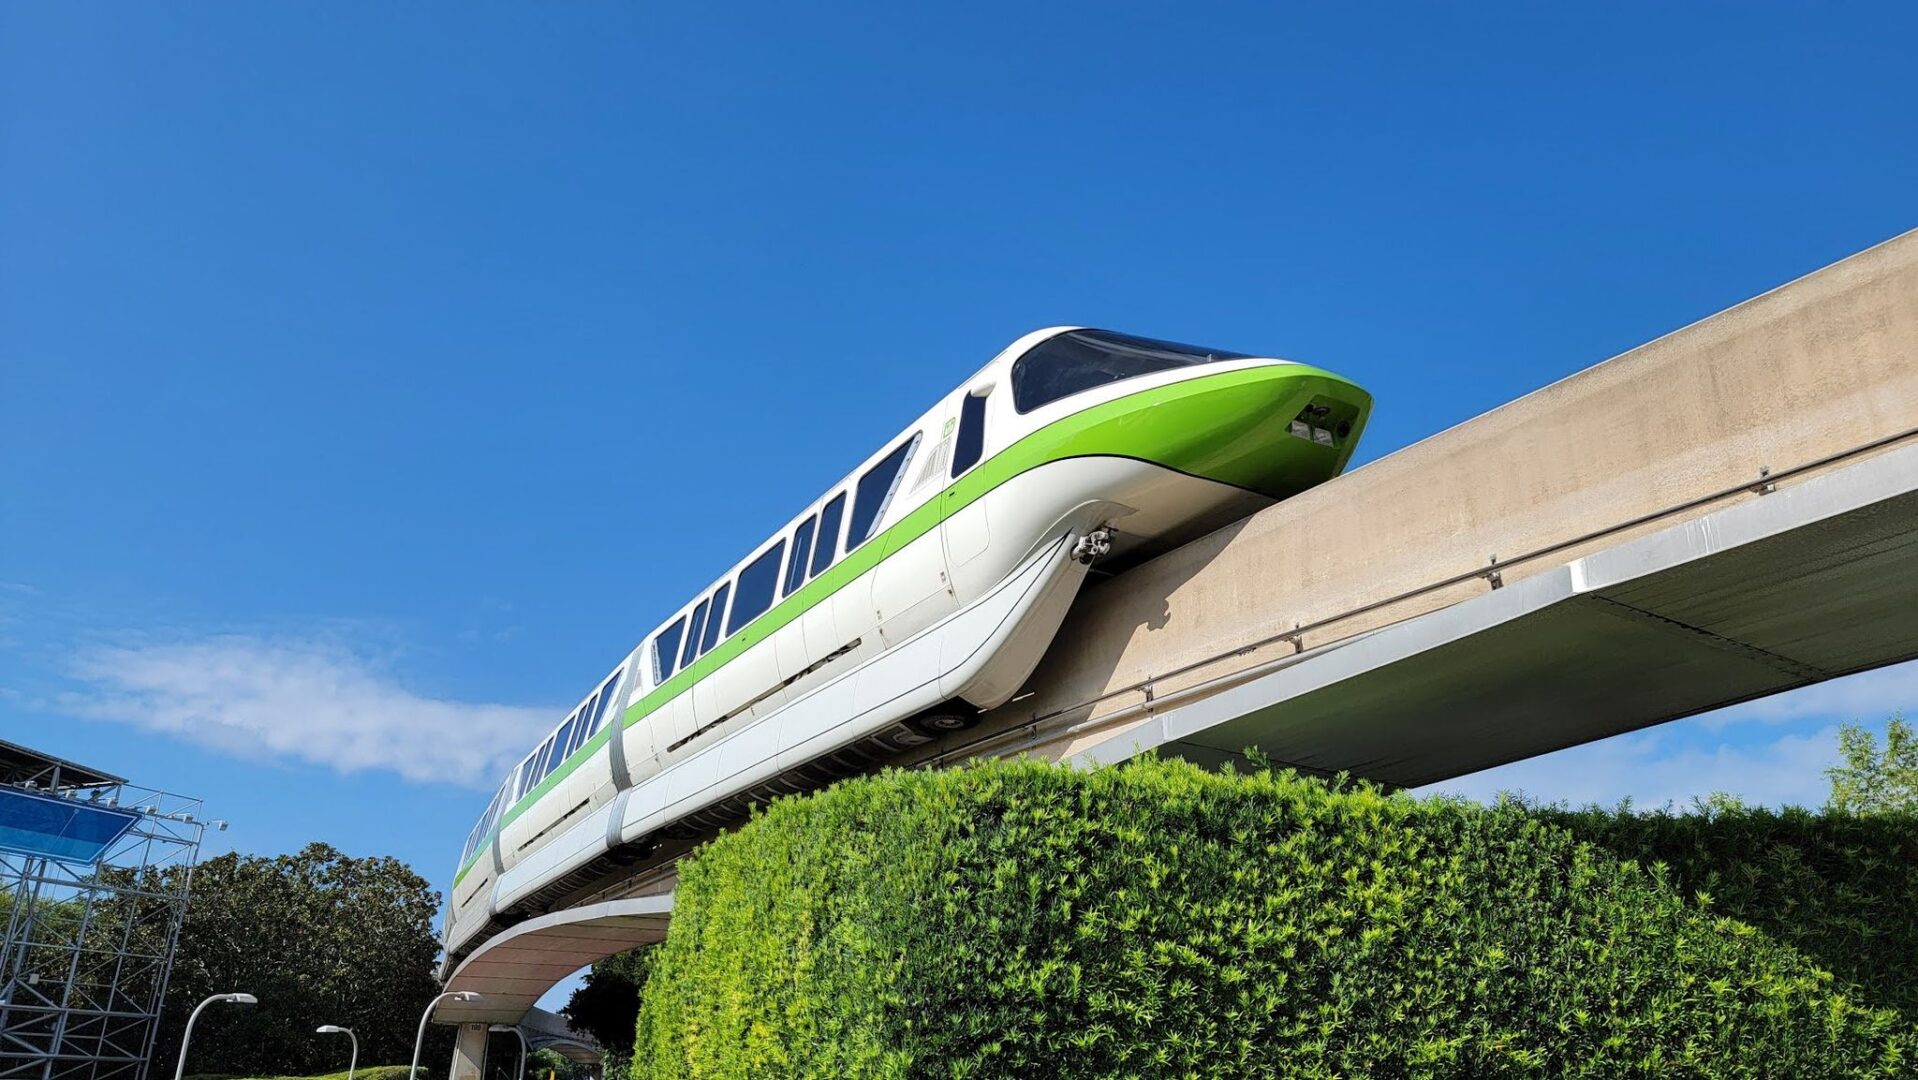 Amendment Filed with Florida to Require State Inspections of Walt Disney World Monorails